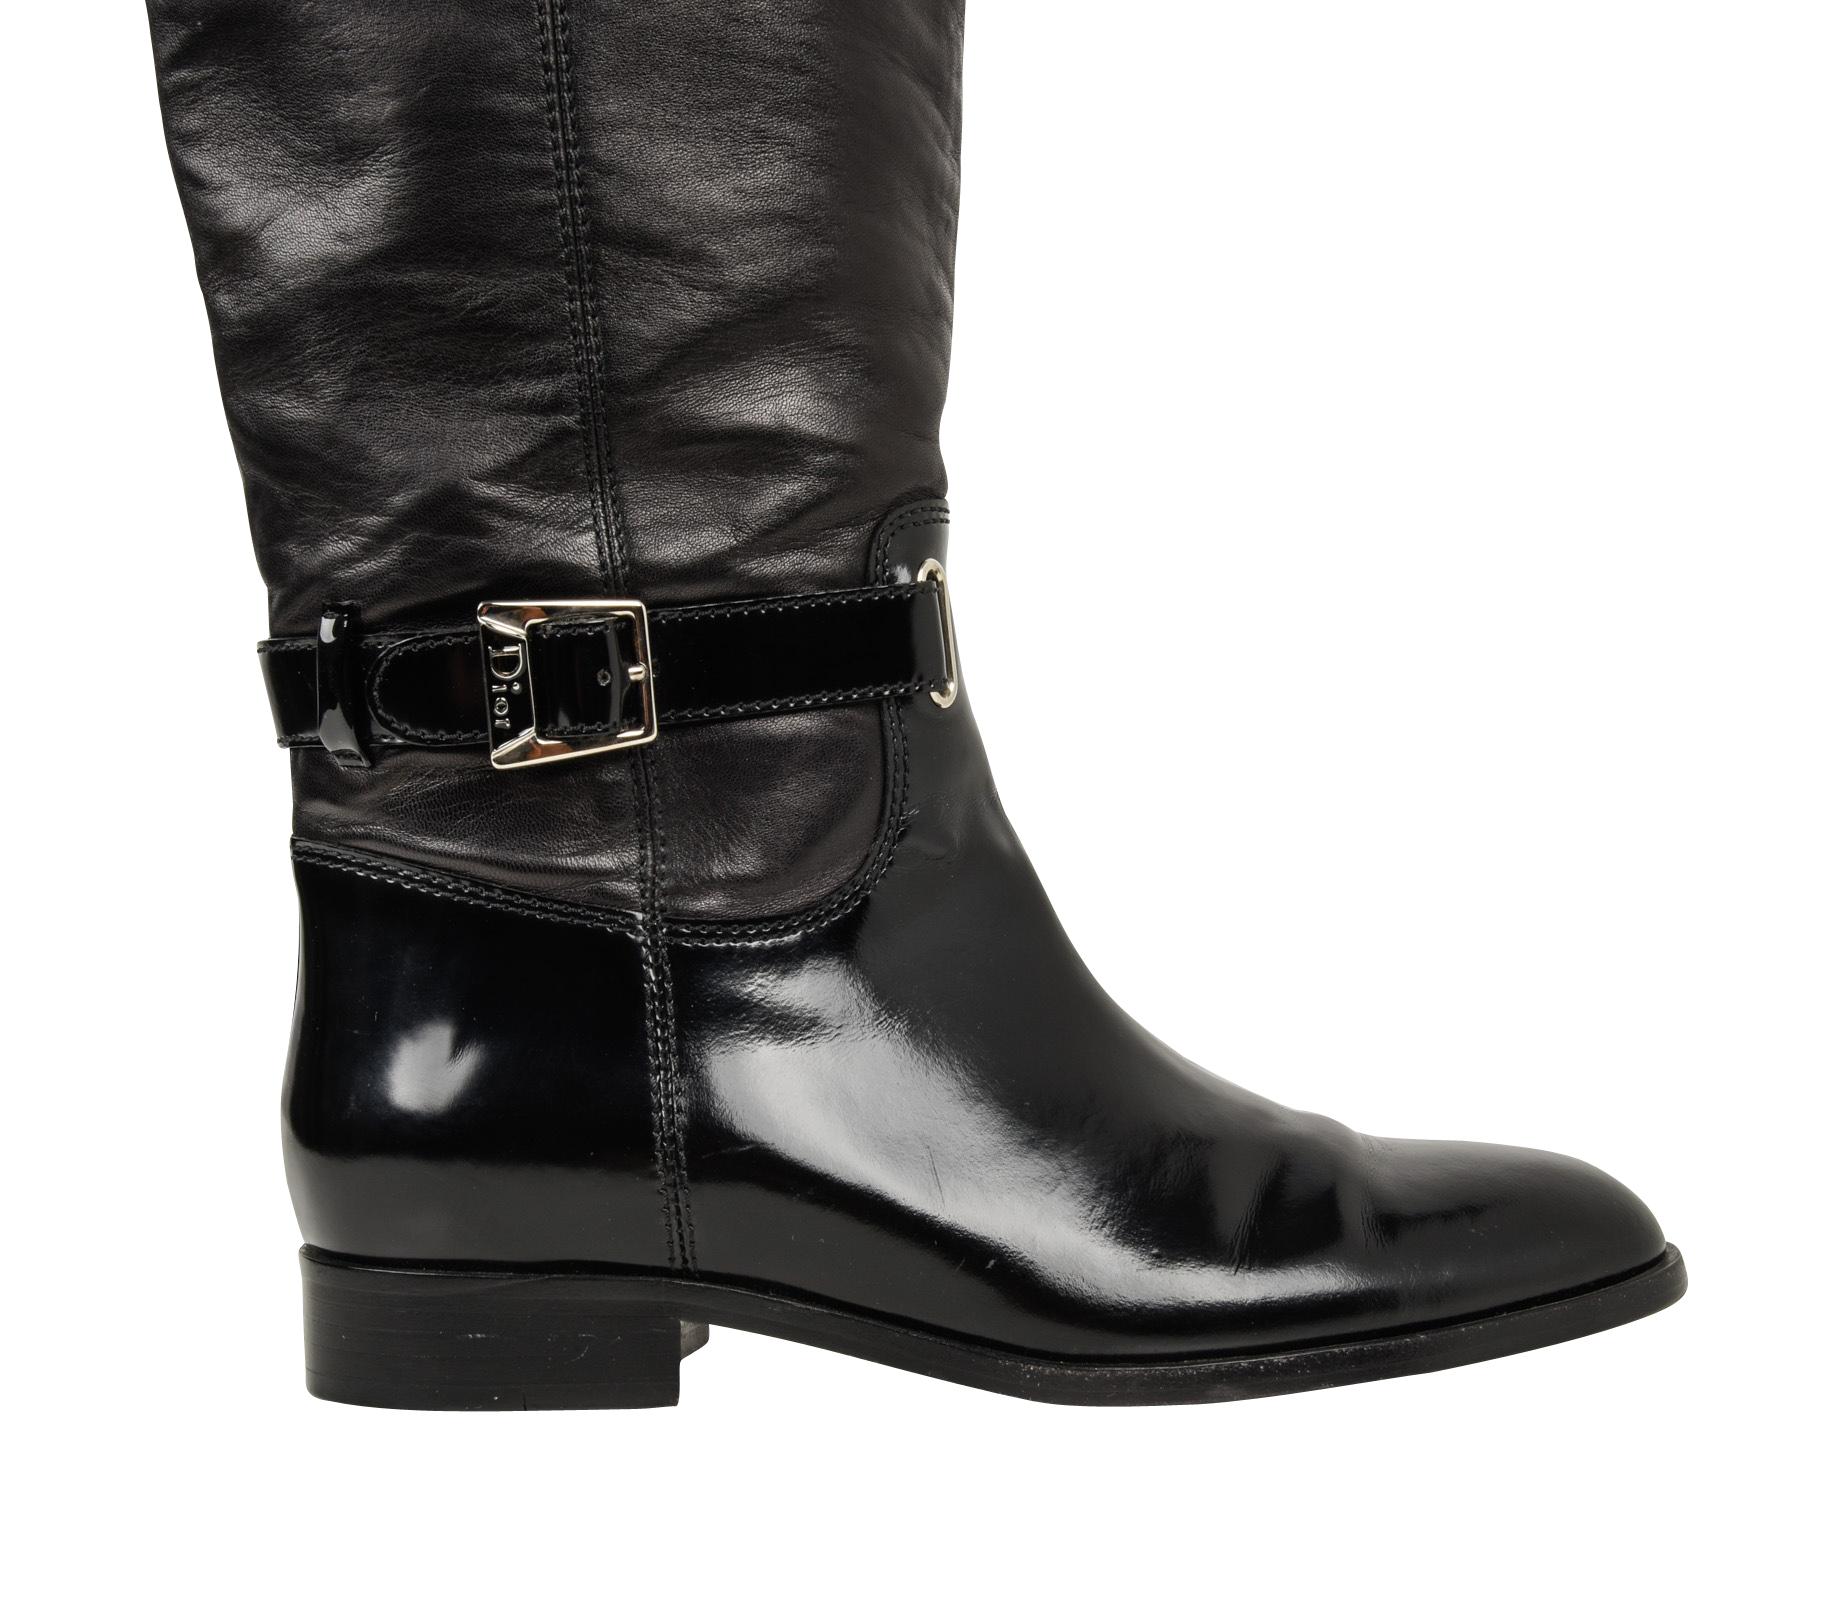 Black Christian Dior Boot Flat Riding Style Knee High 39 / 9